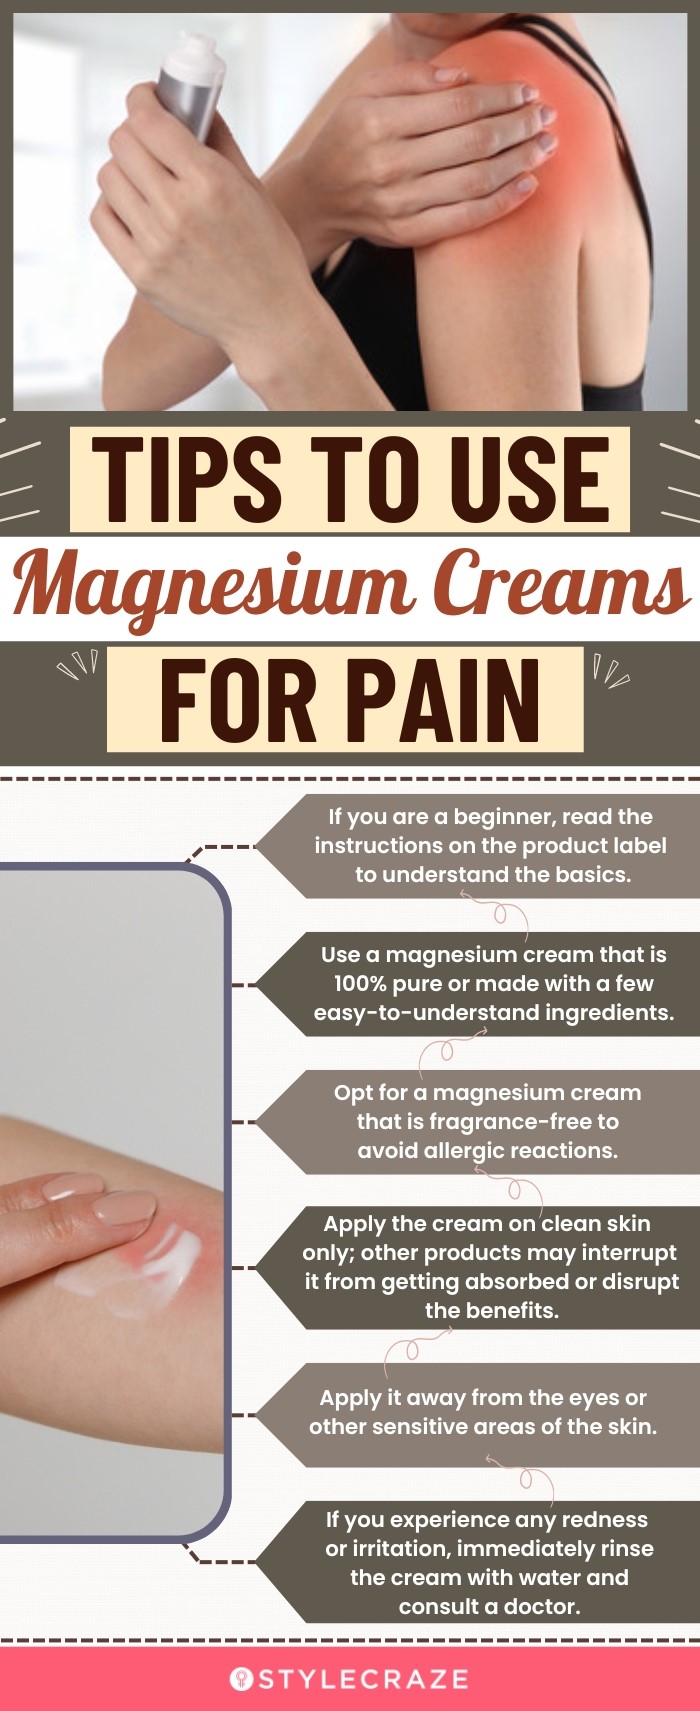 Tips To Use Magnesium Cream For Pain (infographic)